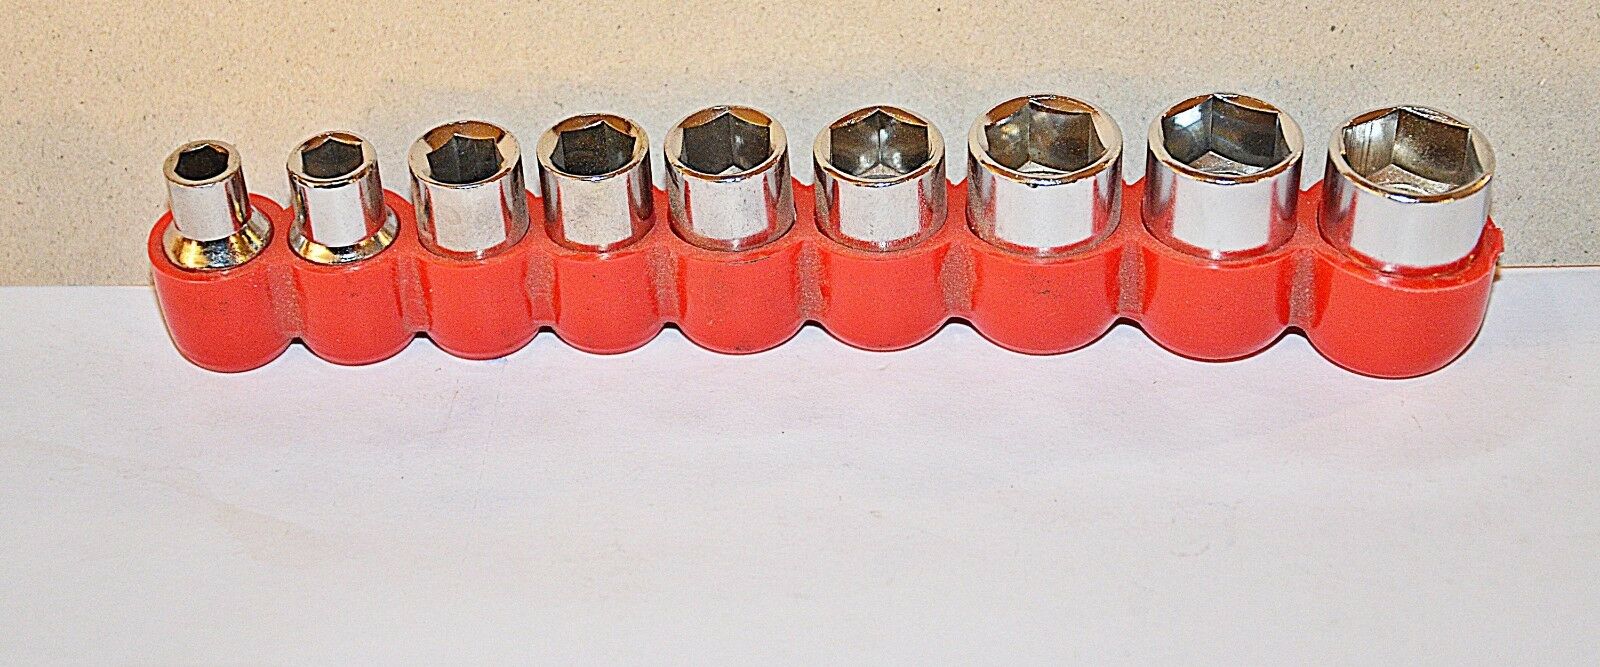 9 piece 1/4 inch Drive Metric mm 6 point Socket Set With holder New Ships Free